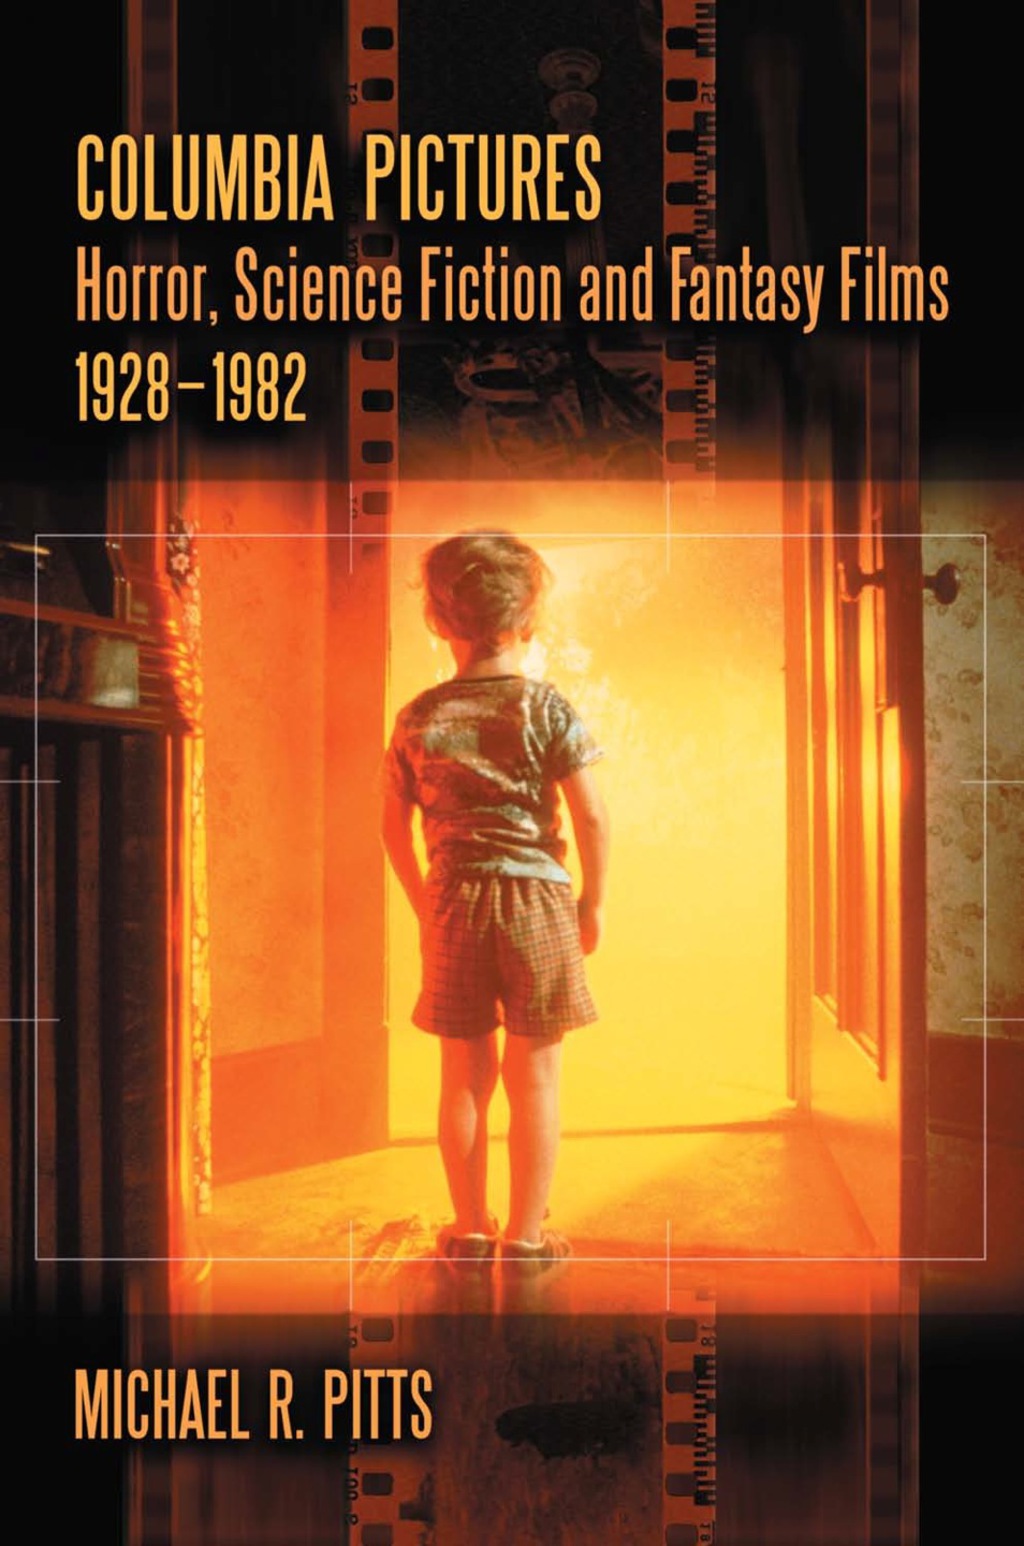 Columbia Pictures Horror  Science Fiction and Fantasy Films  1928-1982 (eBook) - Michael R. Pitts,